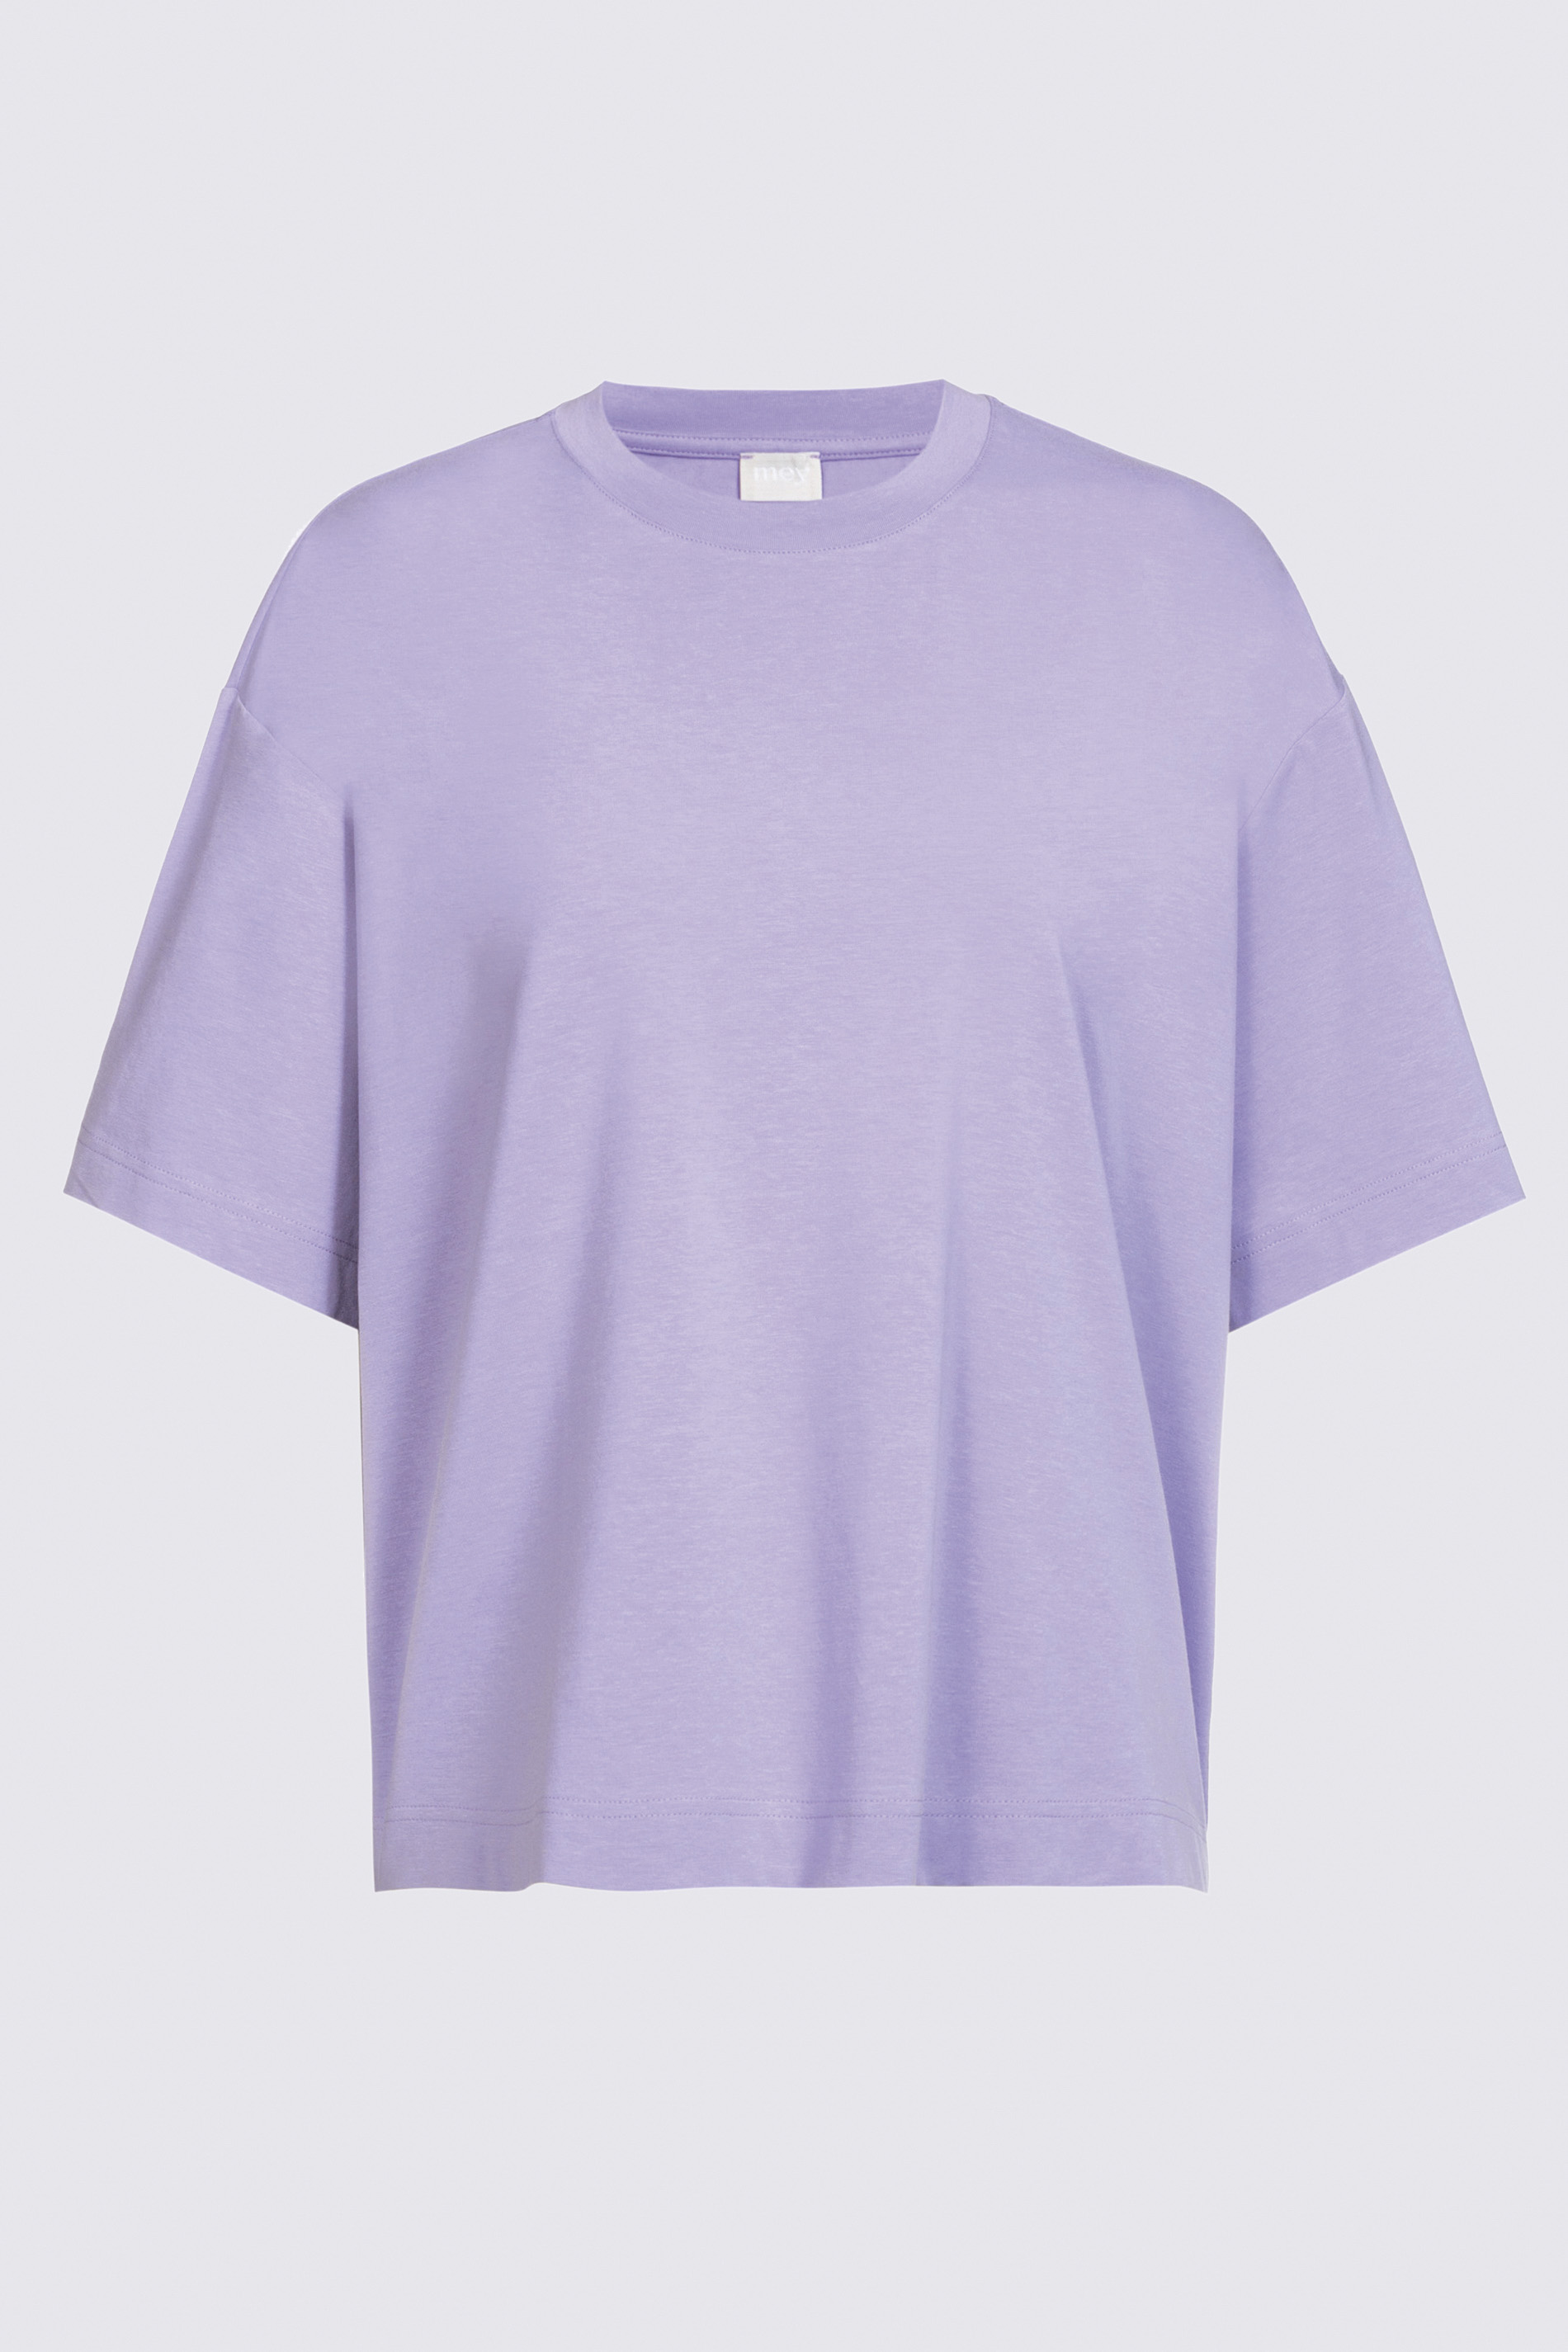 Shirt Lilac Serie Debby Uitknippen | mey®